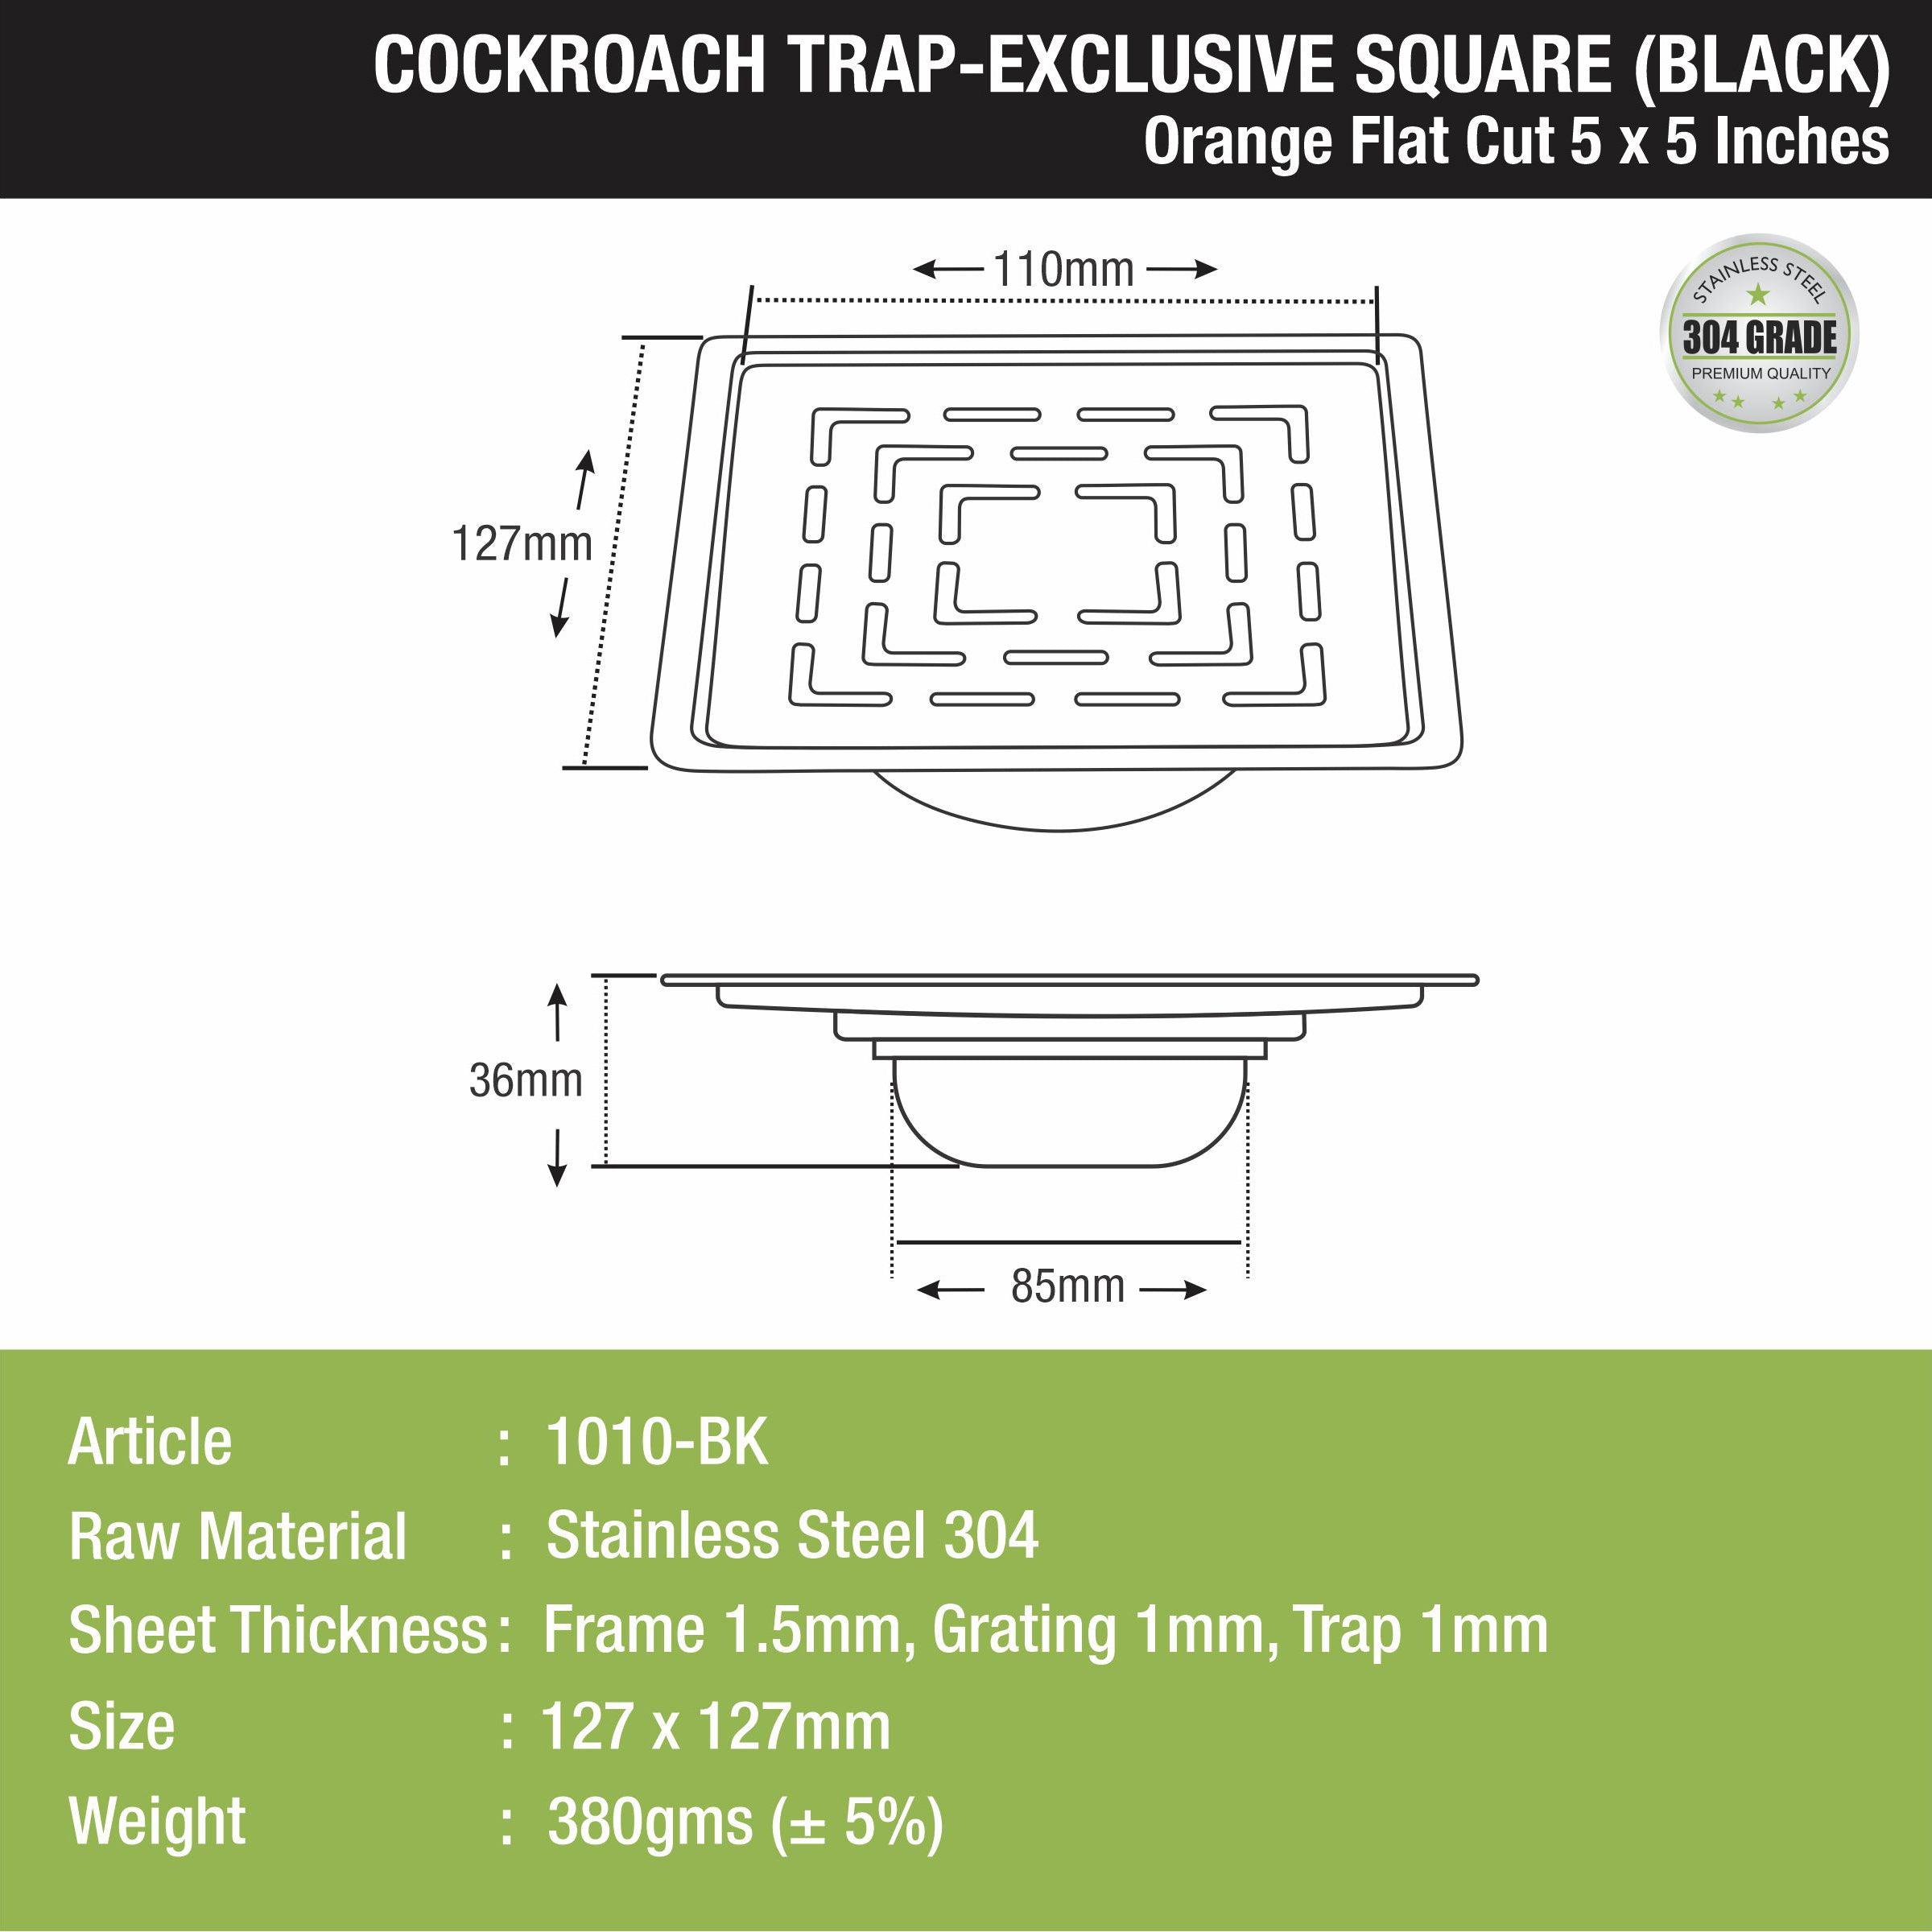 Orange Exclusive Square Flat Cut Floor Drain in Black PVD Coating (5 x 5 Inches) with Cockroach Trap  size and mesurement